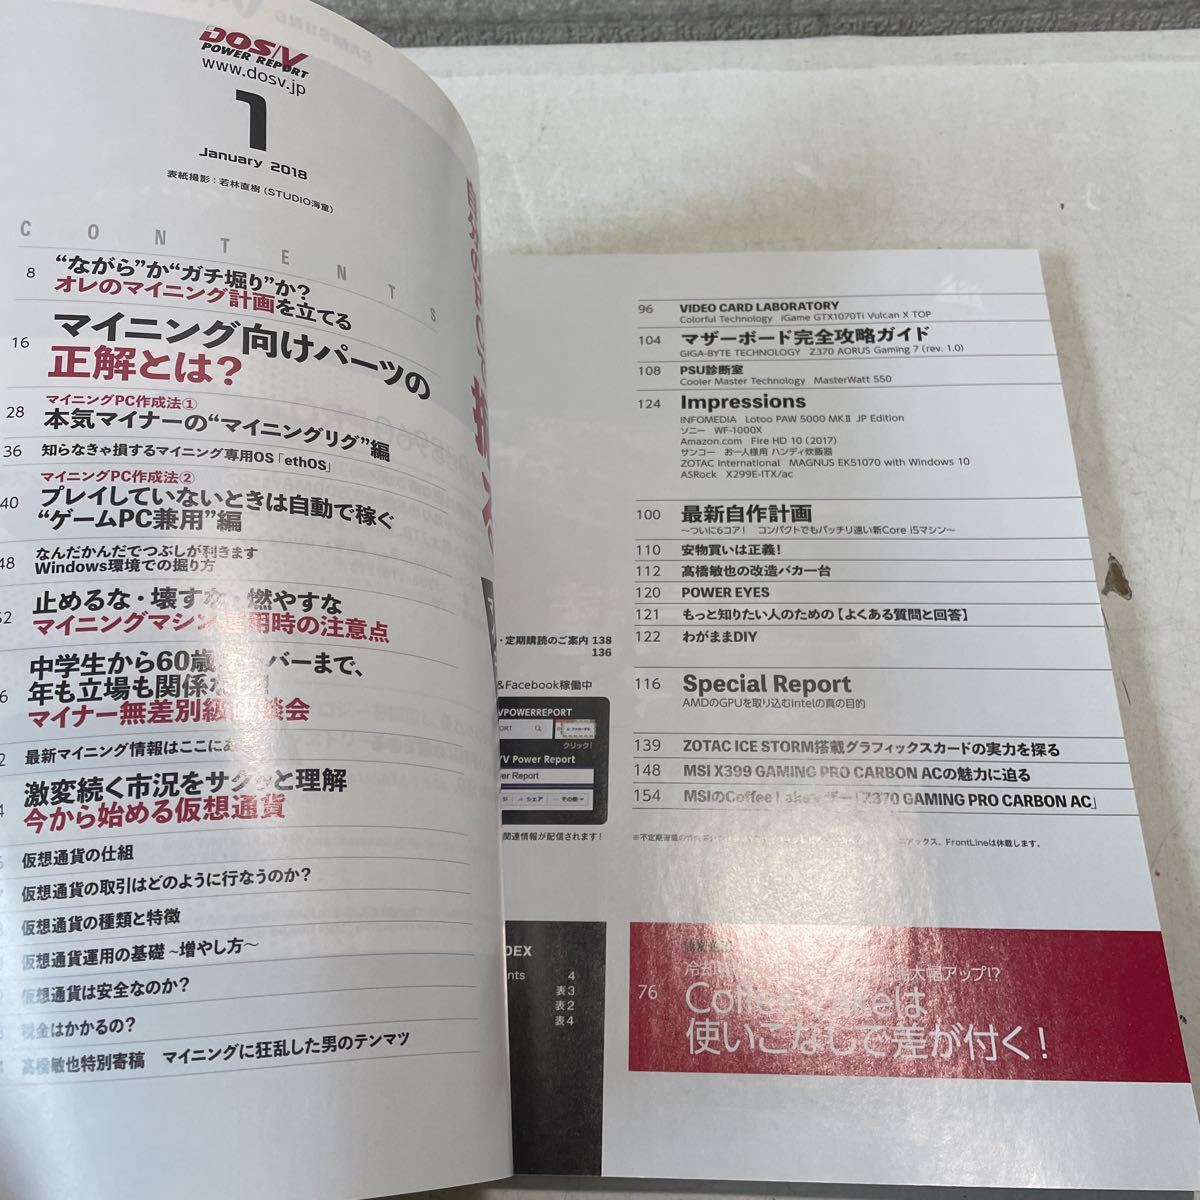 230210★U00★DOS/V POWER REPORT ドスブイパワーレポート 2018年1月号〜12月号 揃い12冊セット★パソコン誌_画像7